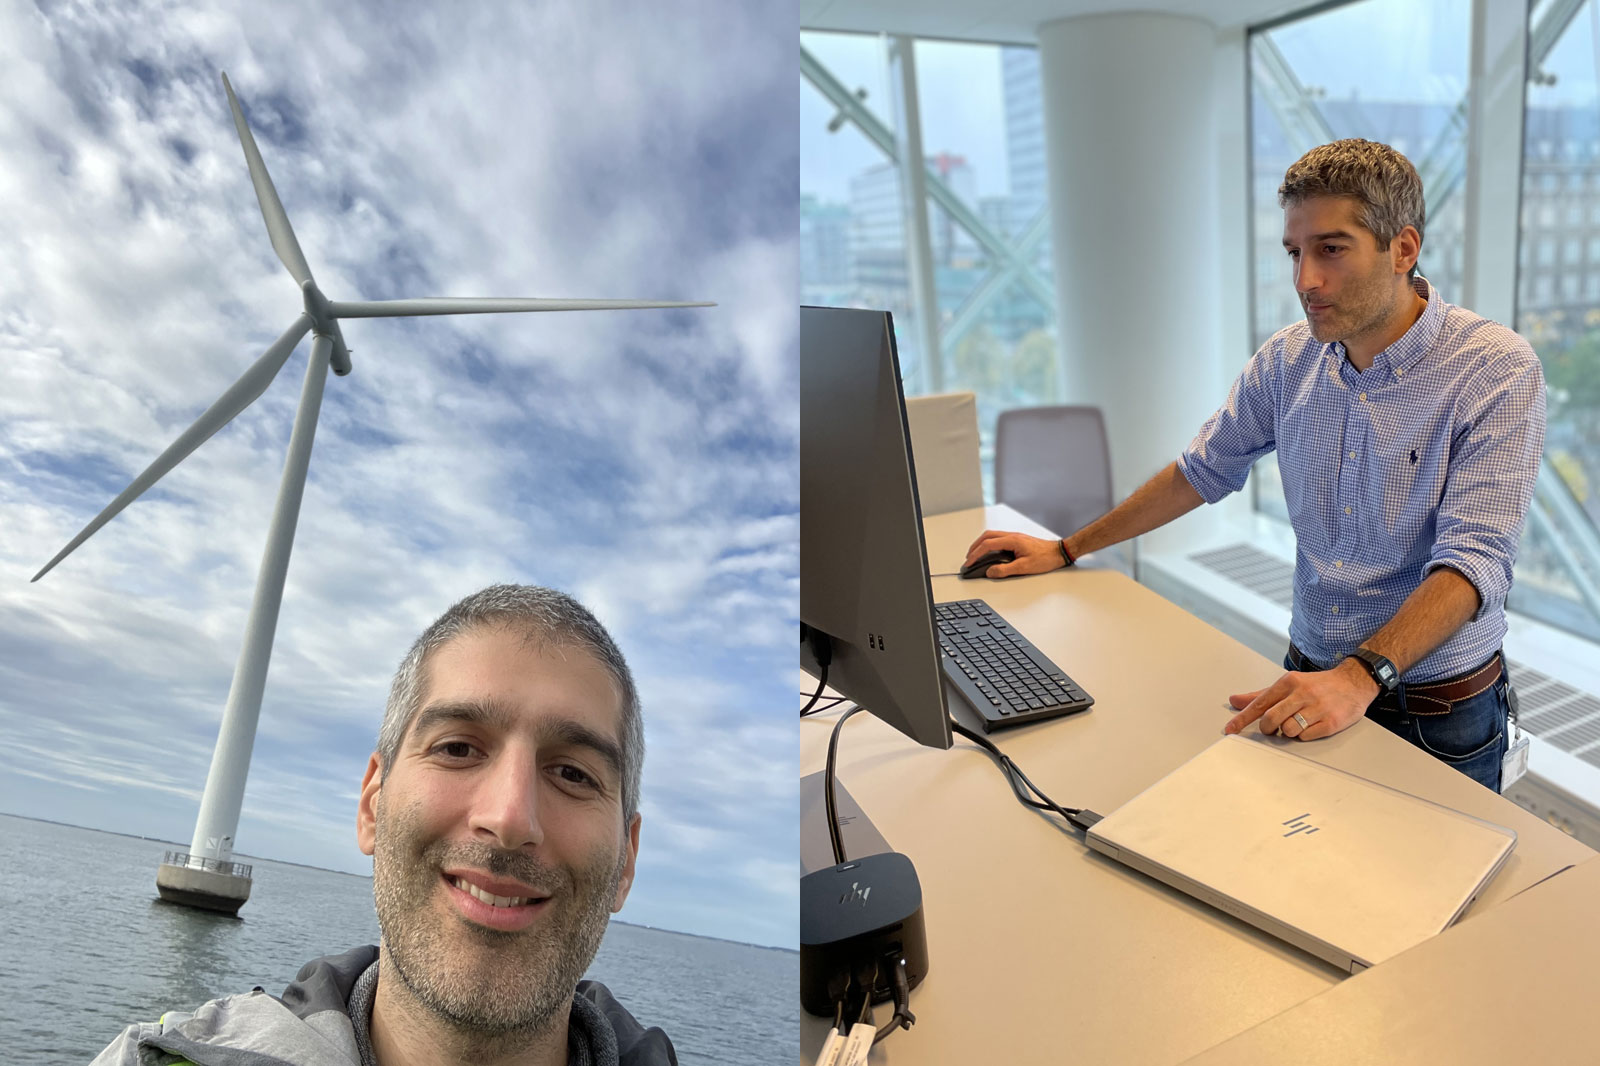 Farzin from the Thor project in Denmark, RWE Renewables